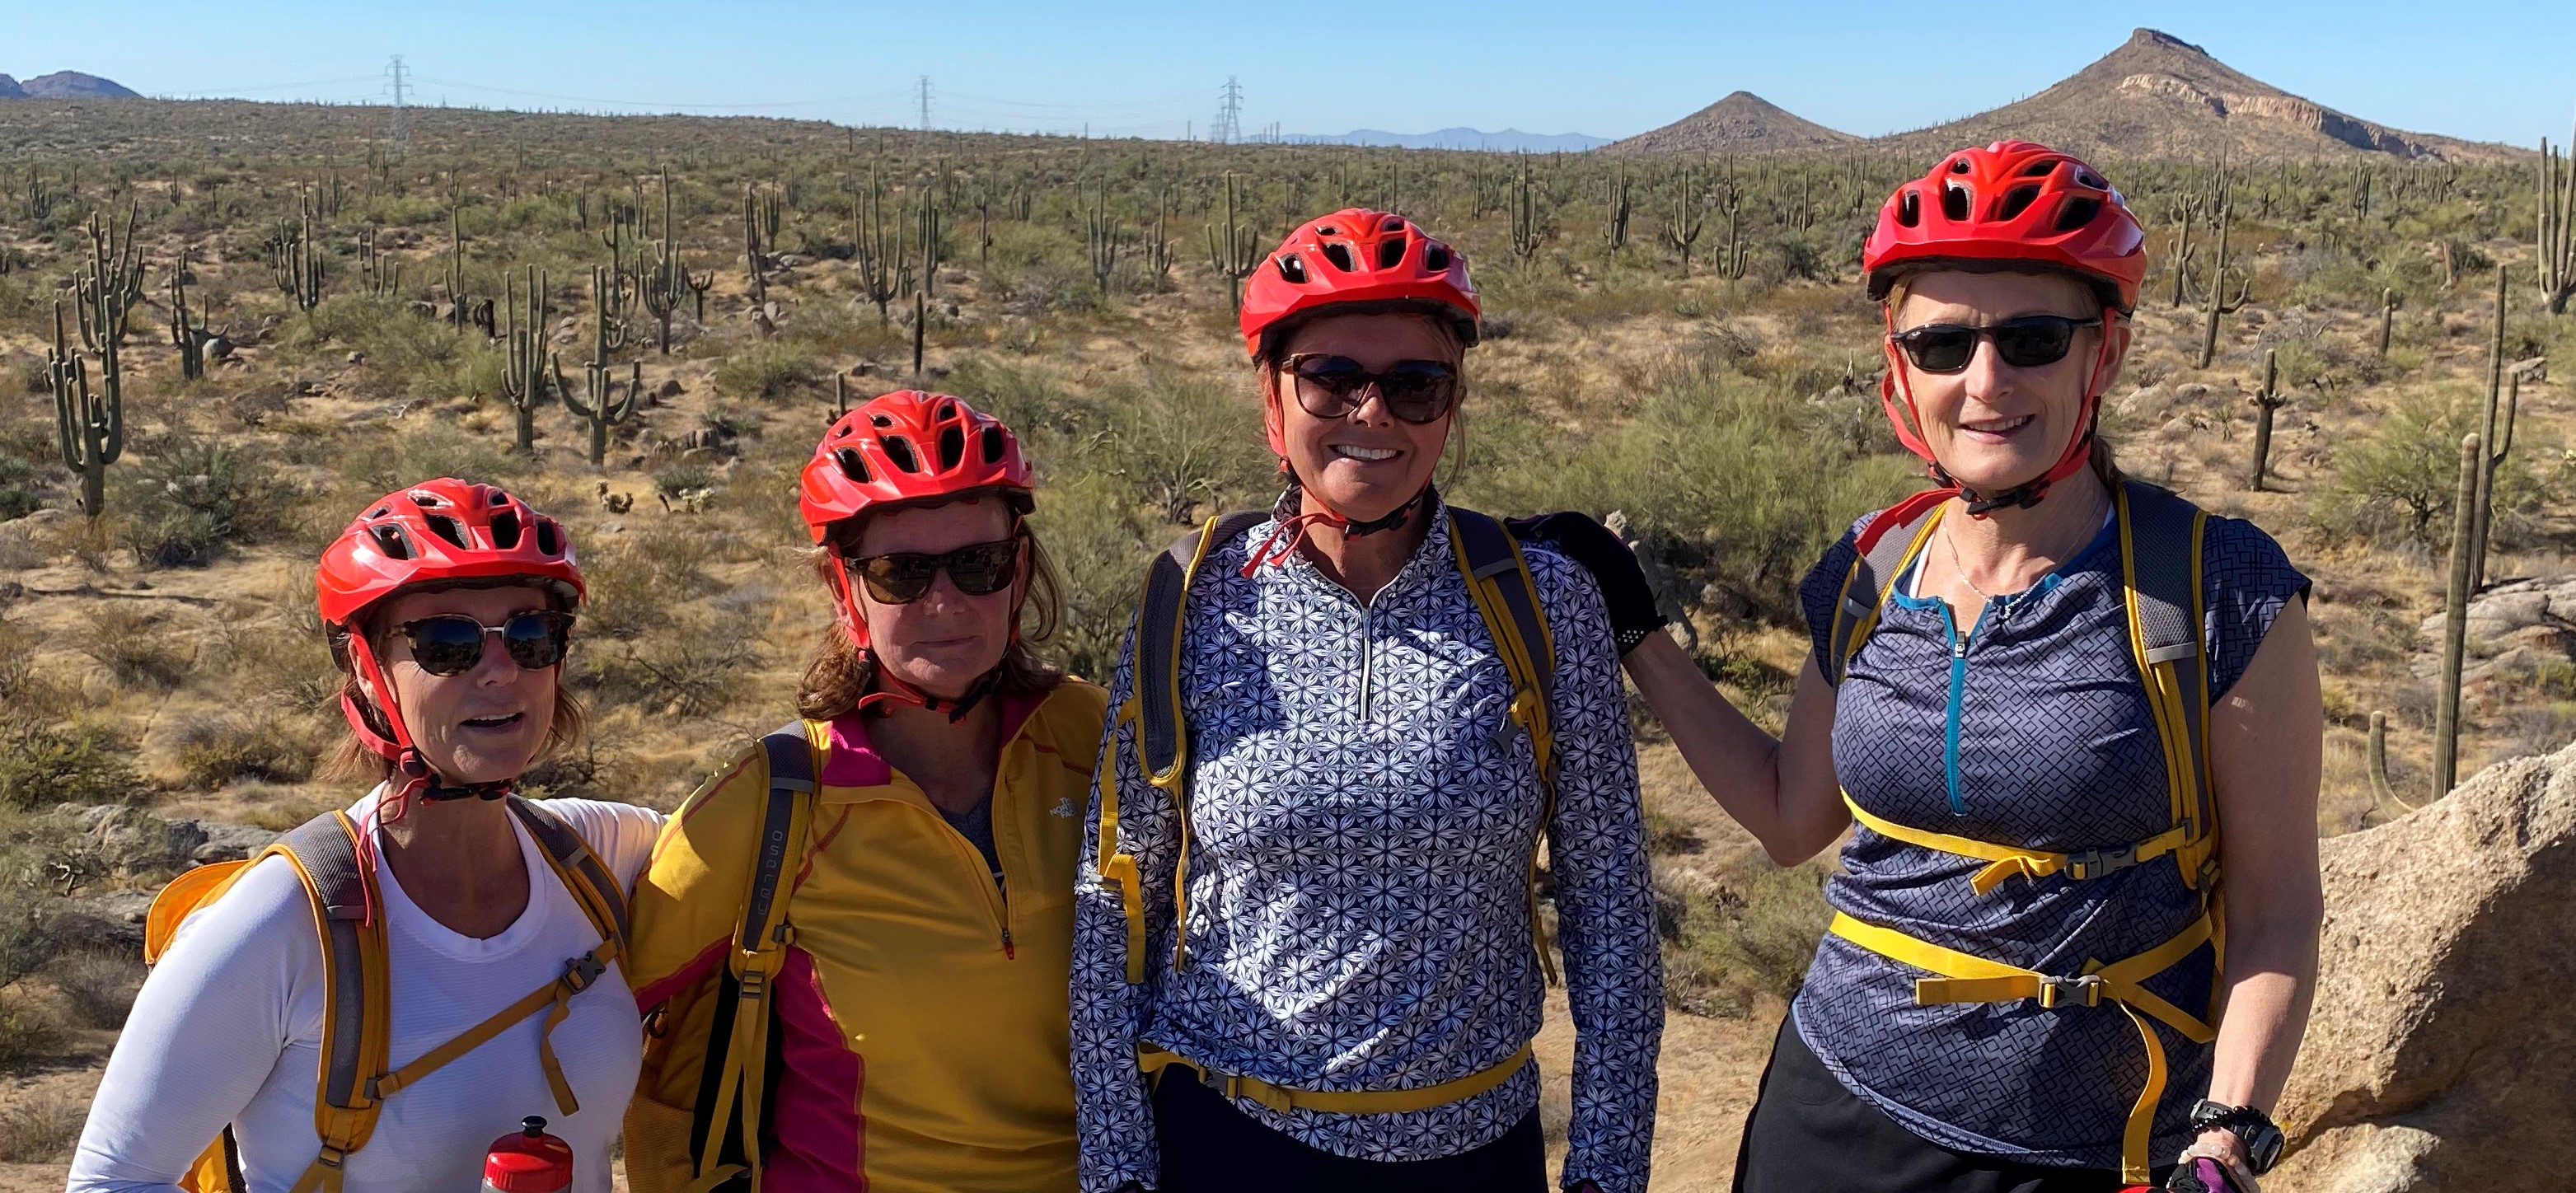 The group of girlfriends riding together in 2019 included Jean Heinly, Noel Garapola, Cyndy Kuczala, and Michelle Davis.